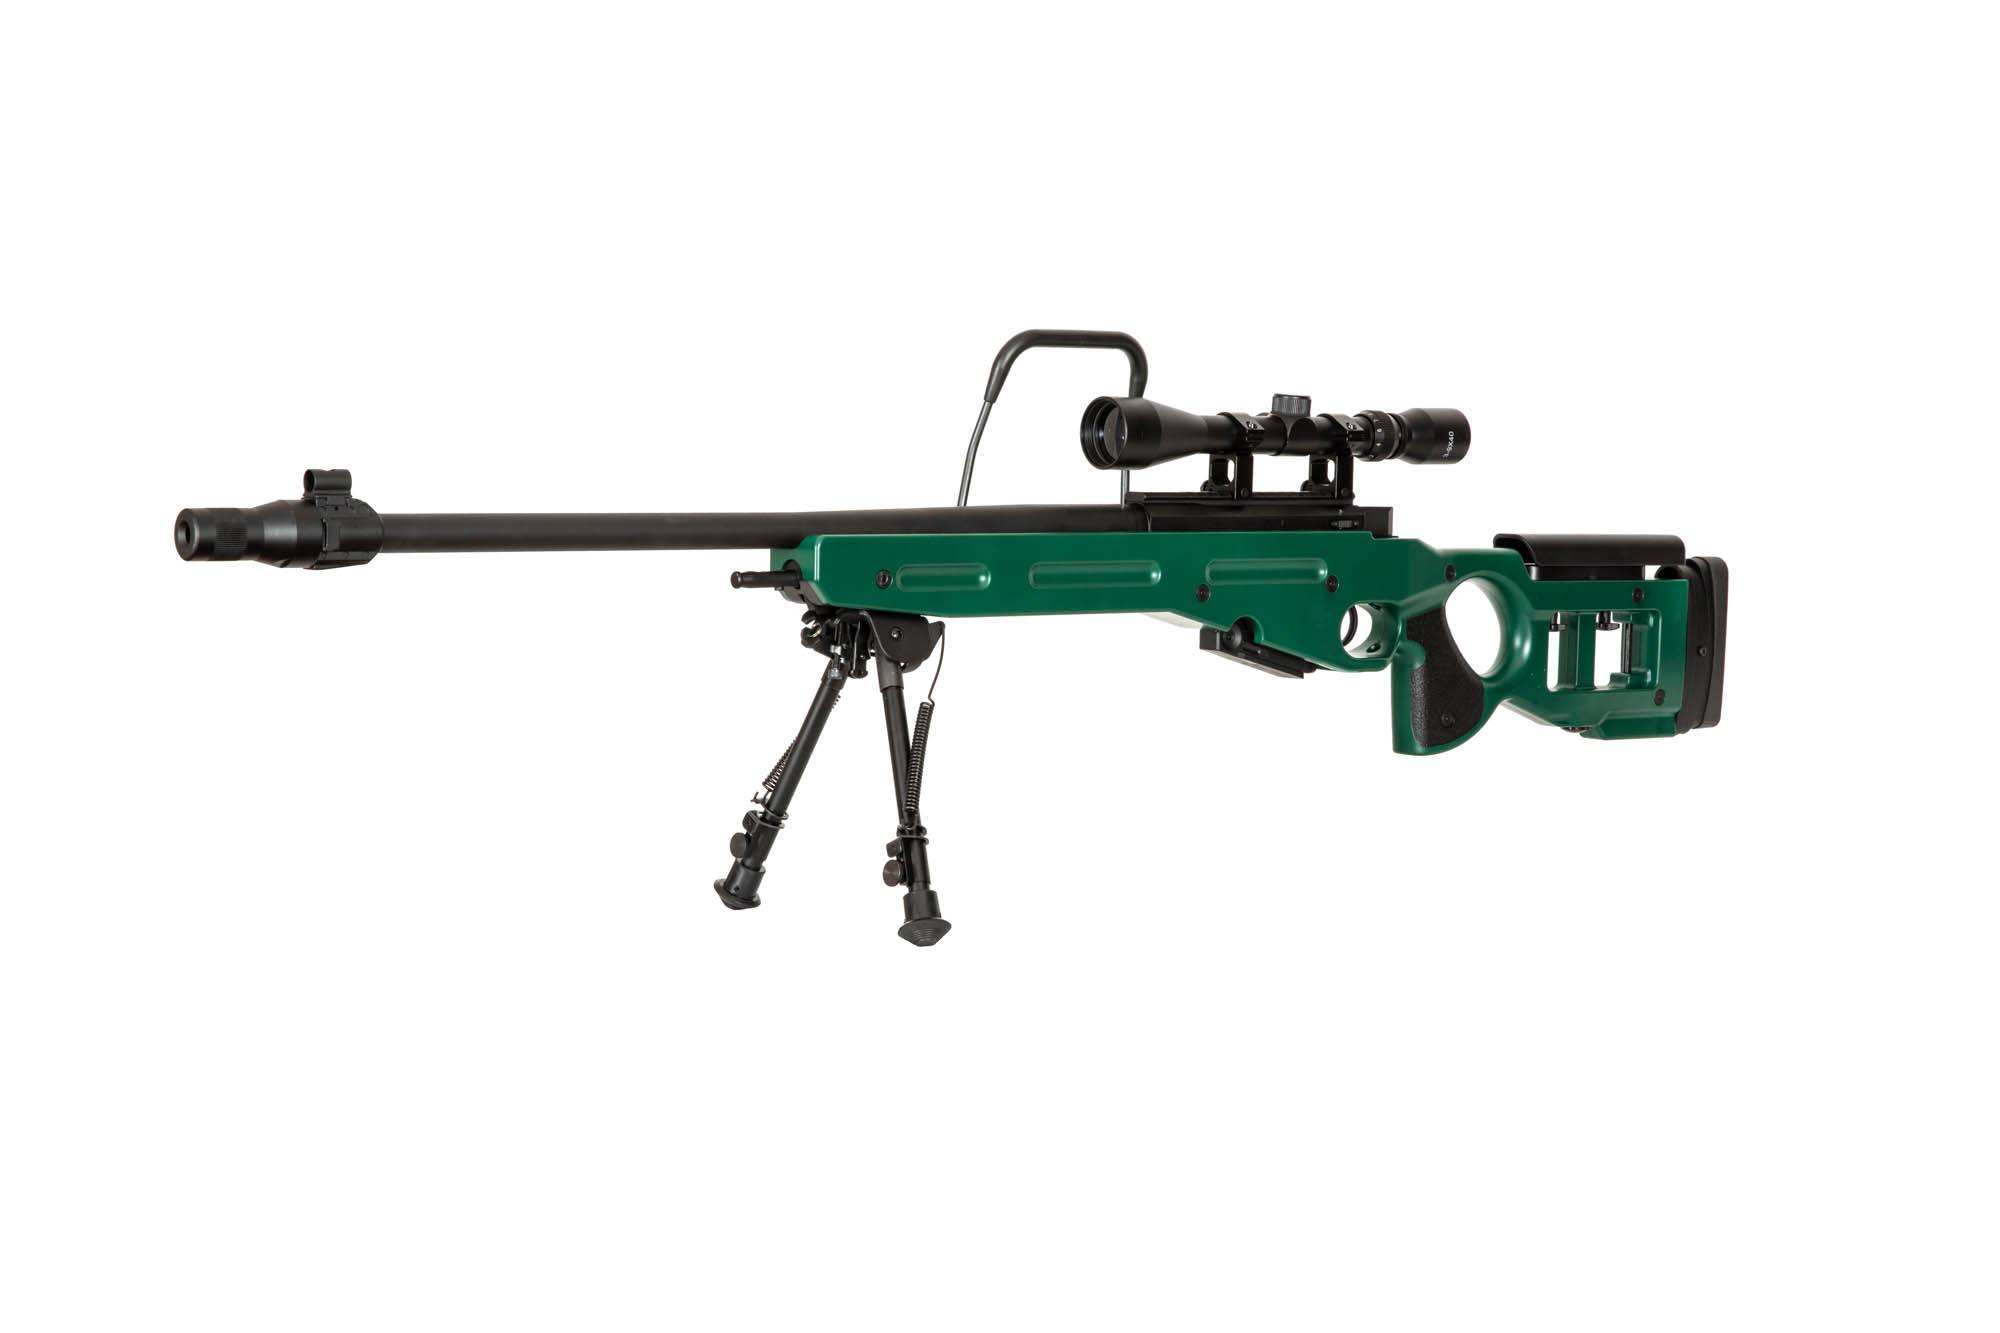 SV-98 CORE ™ sniper rifle replica with bipod, scope and sound suppressor - russian green by Specna Arms on Airsoft Mania Europe